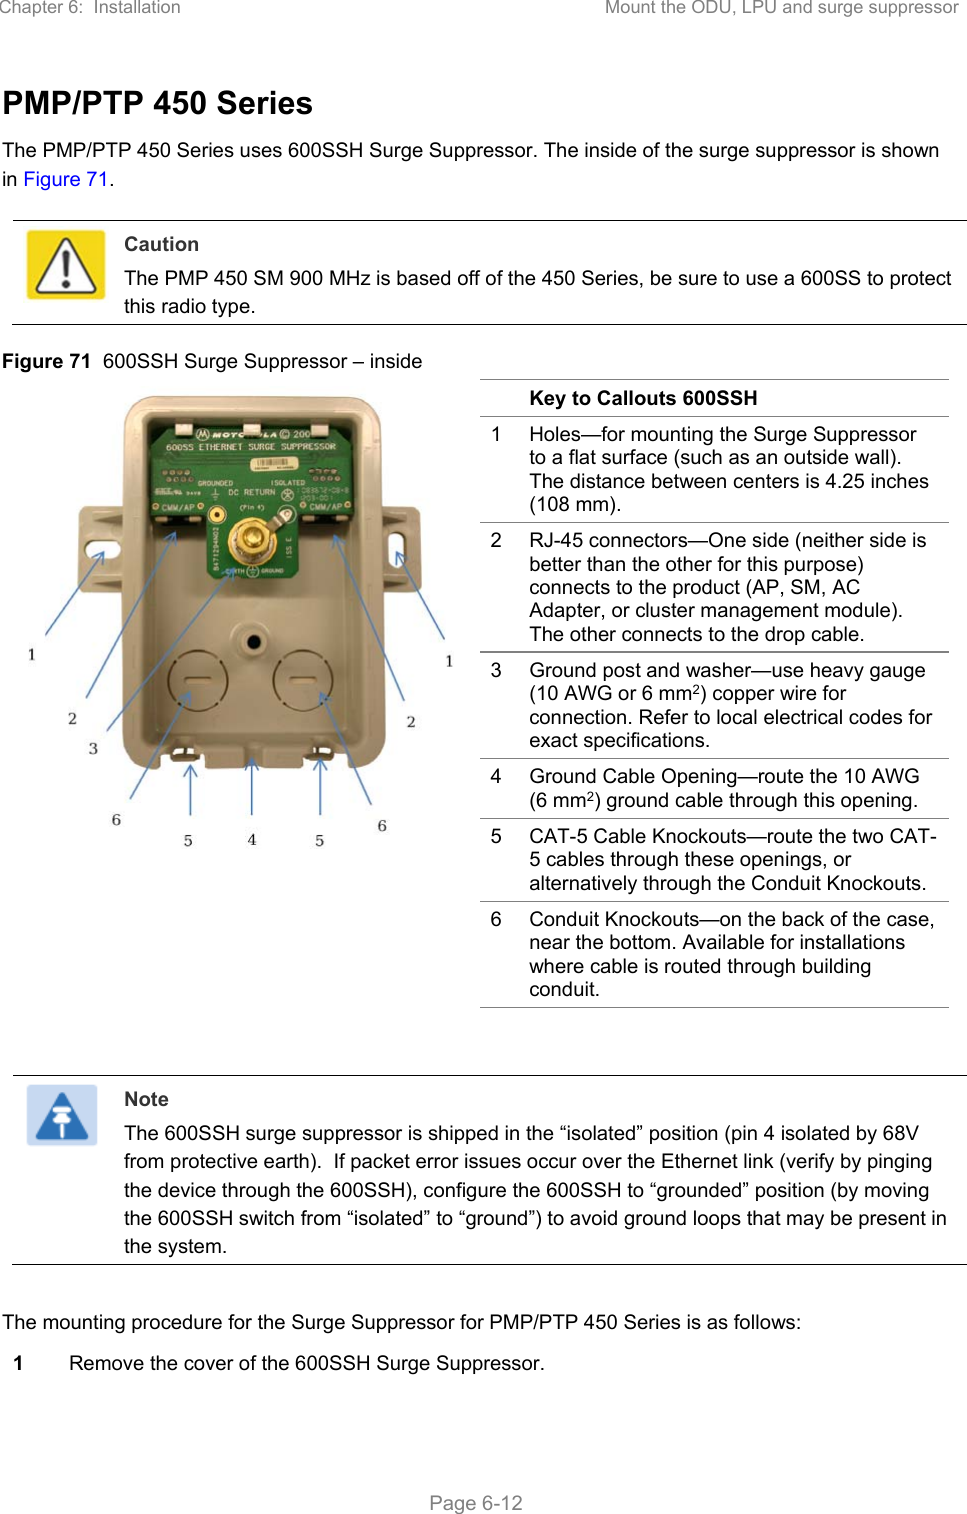 Chapter 6:  Installation  Mount the ODU, LPU and surge suppressor   Page 6-12 PMP/PTP 450 Series The PMP/PTP 450 Series uses 600SSH Surge Suppressor. The inside of the surge suppressor is shown in Figure 71.   Caution The PMP 450 SM 900 MHz is based off of the 450 Series, be sure to use a 600SS to protect this radio type. Figure 71  600SSH Surge Suppressor – inside    Key to Callouts 600SSH 1  Holes—for mounting the Surge Suppressor to a flat surface (such as an outside wall). The distance between centers is 4.25 inches (108 mm). 2  RJ-45 connectors—One side (neither side is better than the other for this purpose) connects to the product (AP, SM, AC Adapter, or cluster management module). The other connects to the drop cable. 3  Ground post and washer—use heavy gauge (10 AWG or 6 mm2) copper wire for connection. Refer to local electrical codes for exact specifications. 4  Ground Cable Opening—route the 10 AWG (6 mm2) ground cable through this opening. 5  CAT-5 Cable Knockouts—route the two CAT-5 cables through these openings, or alternatively through the Conduit Knockouts. 6  Conduit Knockouts—on the back of the case, near the bottom. Available for installations where cable is routed through building conduit.    Note The 600SSH surge suppressor is shipped in the “isolated” position (pin 4 isolated by 68V from protective earth).  If packet error issues occur over the Ethernet link (verify by pinging the device through the 600SSH), configure the 600SSH to “grounded” position (by moving the 600SSH switch from “isolated” to “ground”) to avoid ground loops that may be present in the system.  The mounting procedure for the Surge Suppressor for PMP/PTP 450 Series is as follows: 1 Remove the cover of the 600SSH Surge Suppressor. 